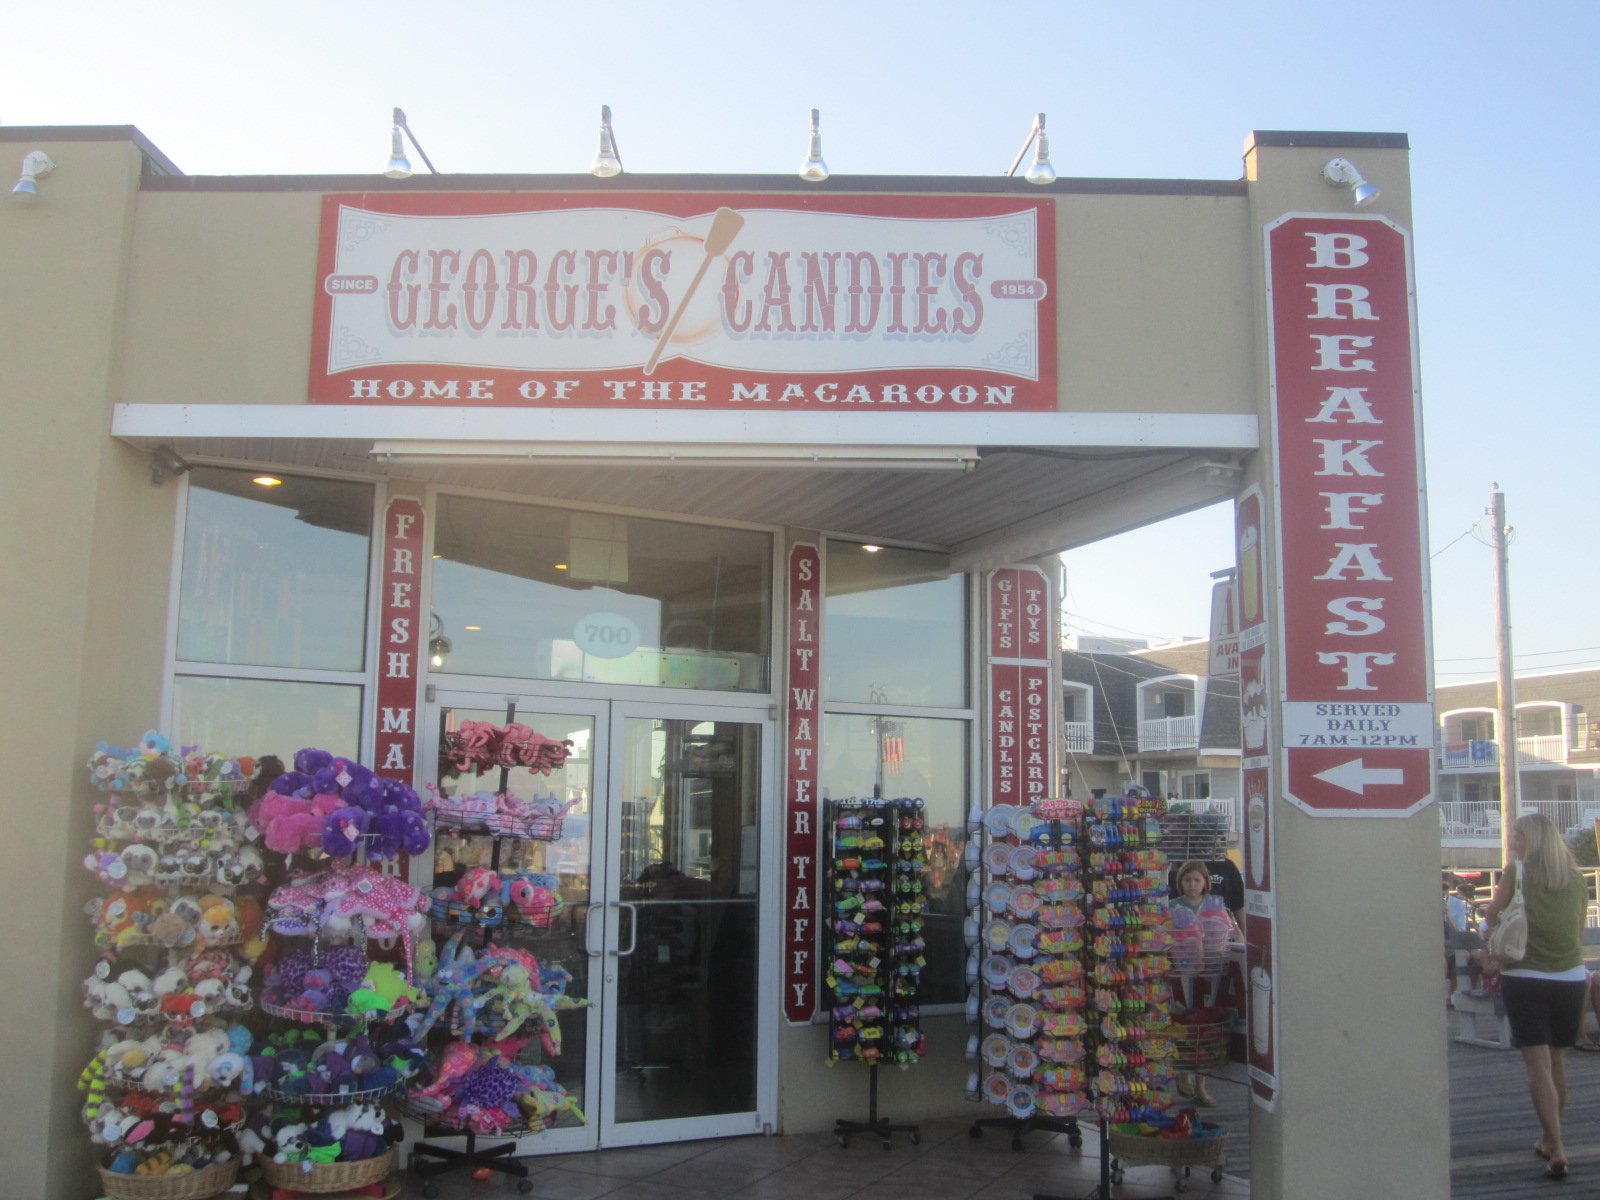 George's Candes since 1954, home of the macaroon - Ocean City, NJ